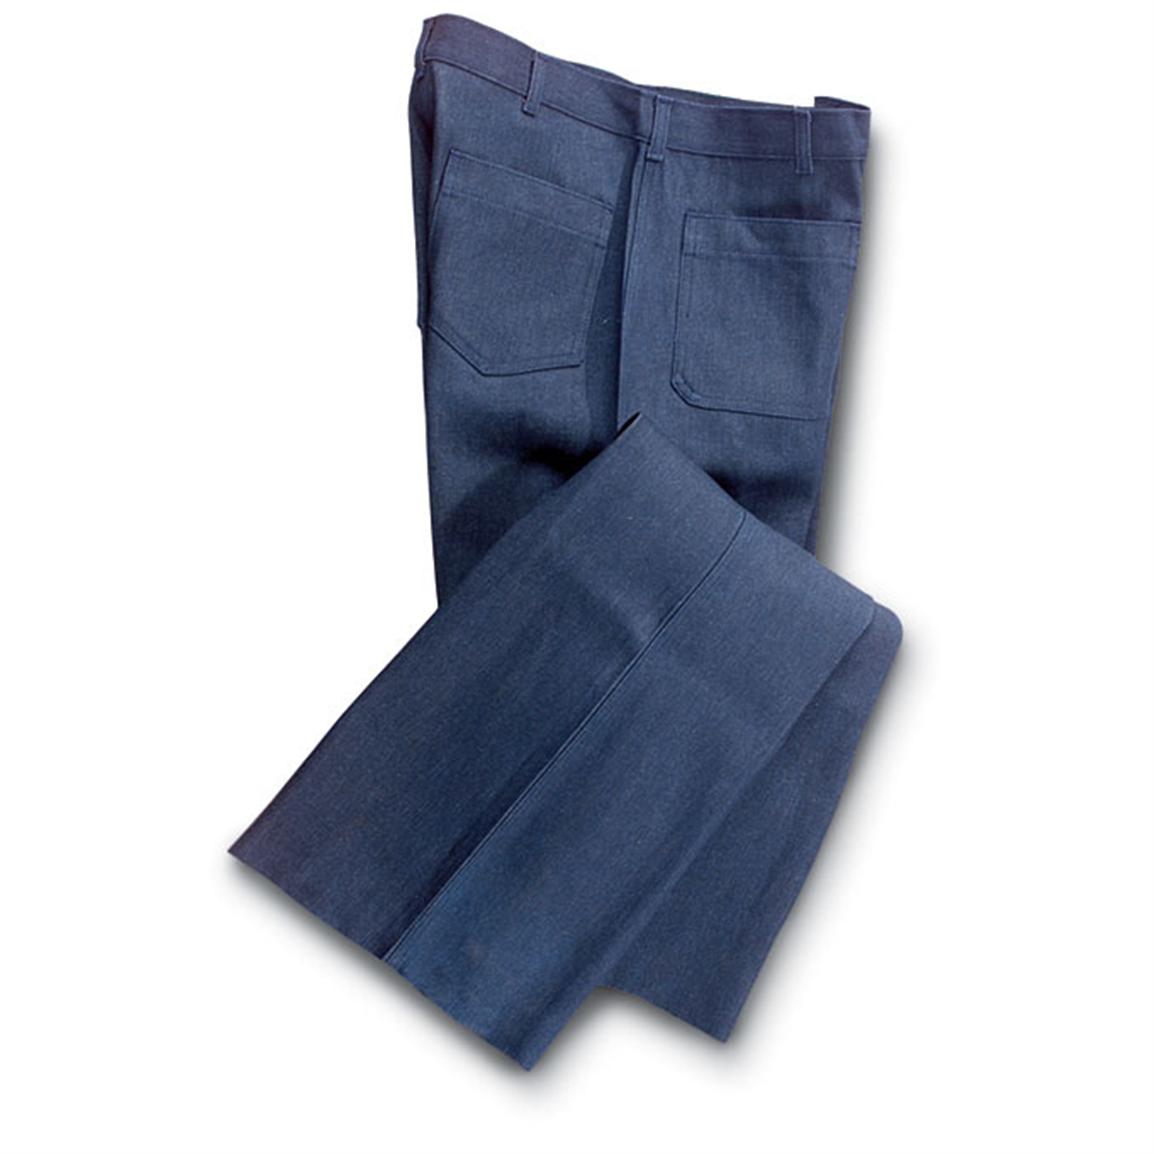 New U.S. Navy Unhemmed Dungarees, Blue - 84802, Pants at Sportsman's Guide